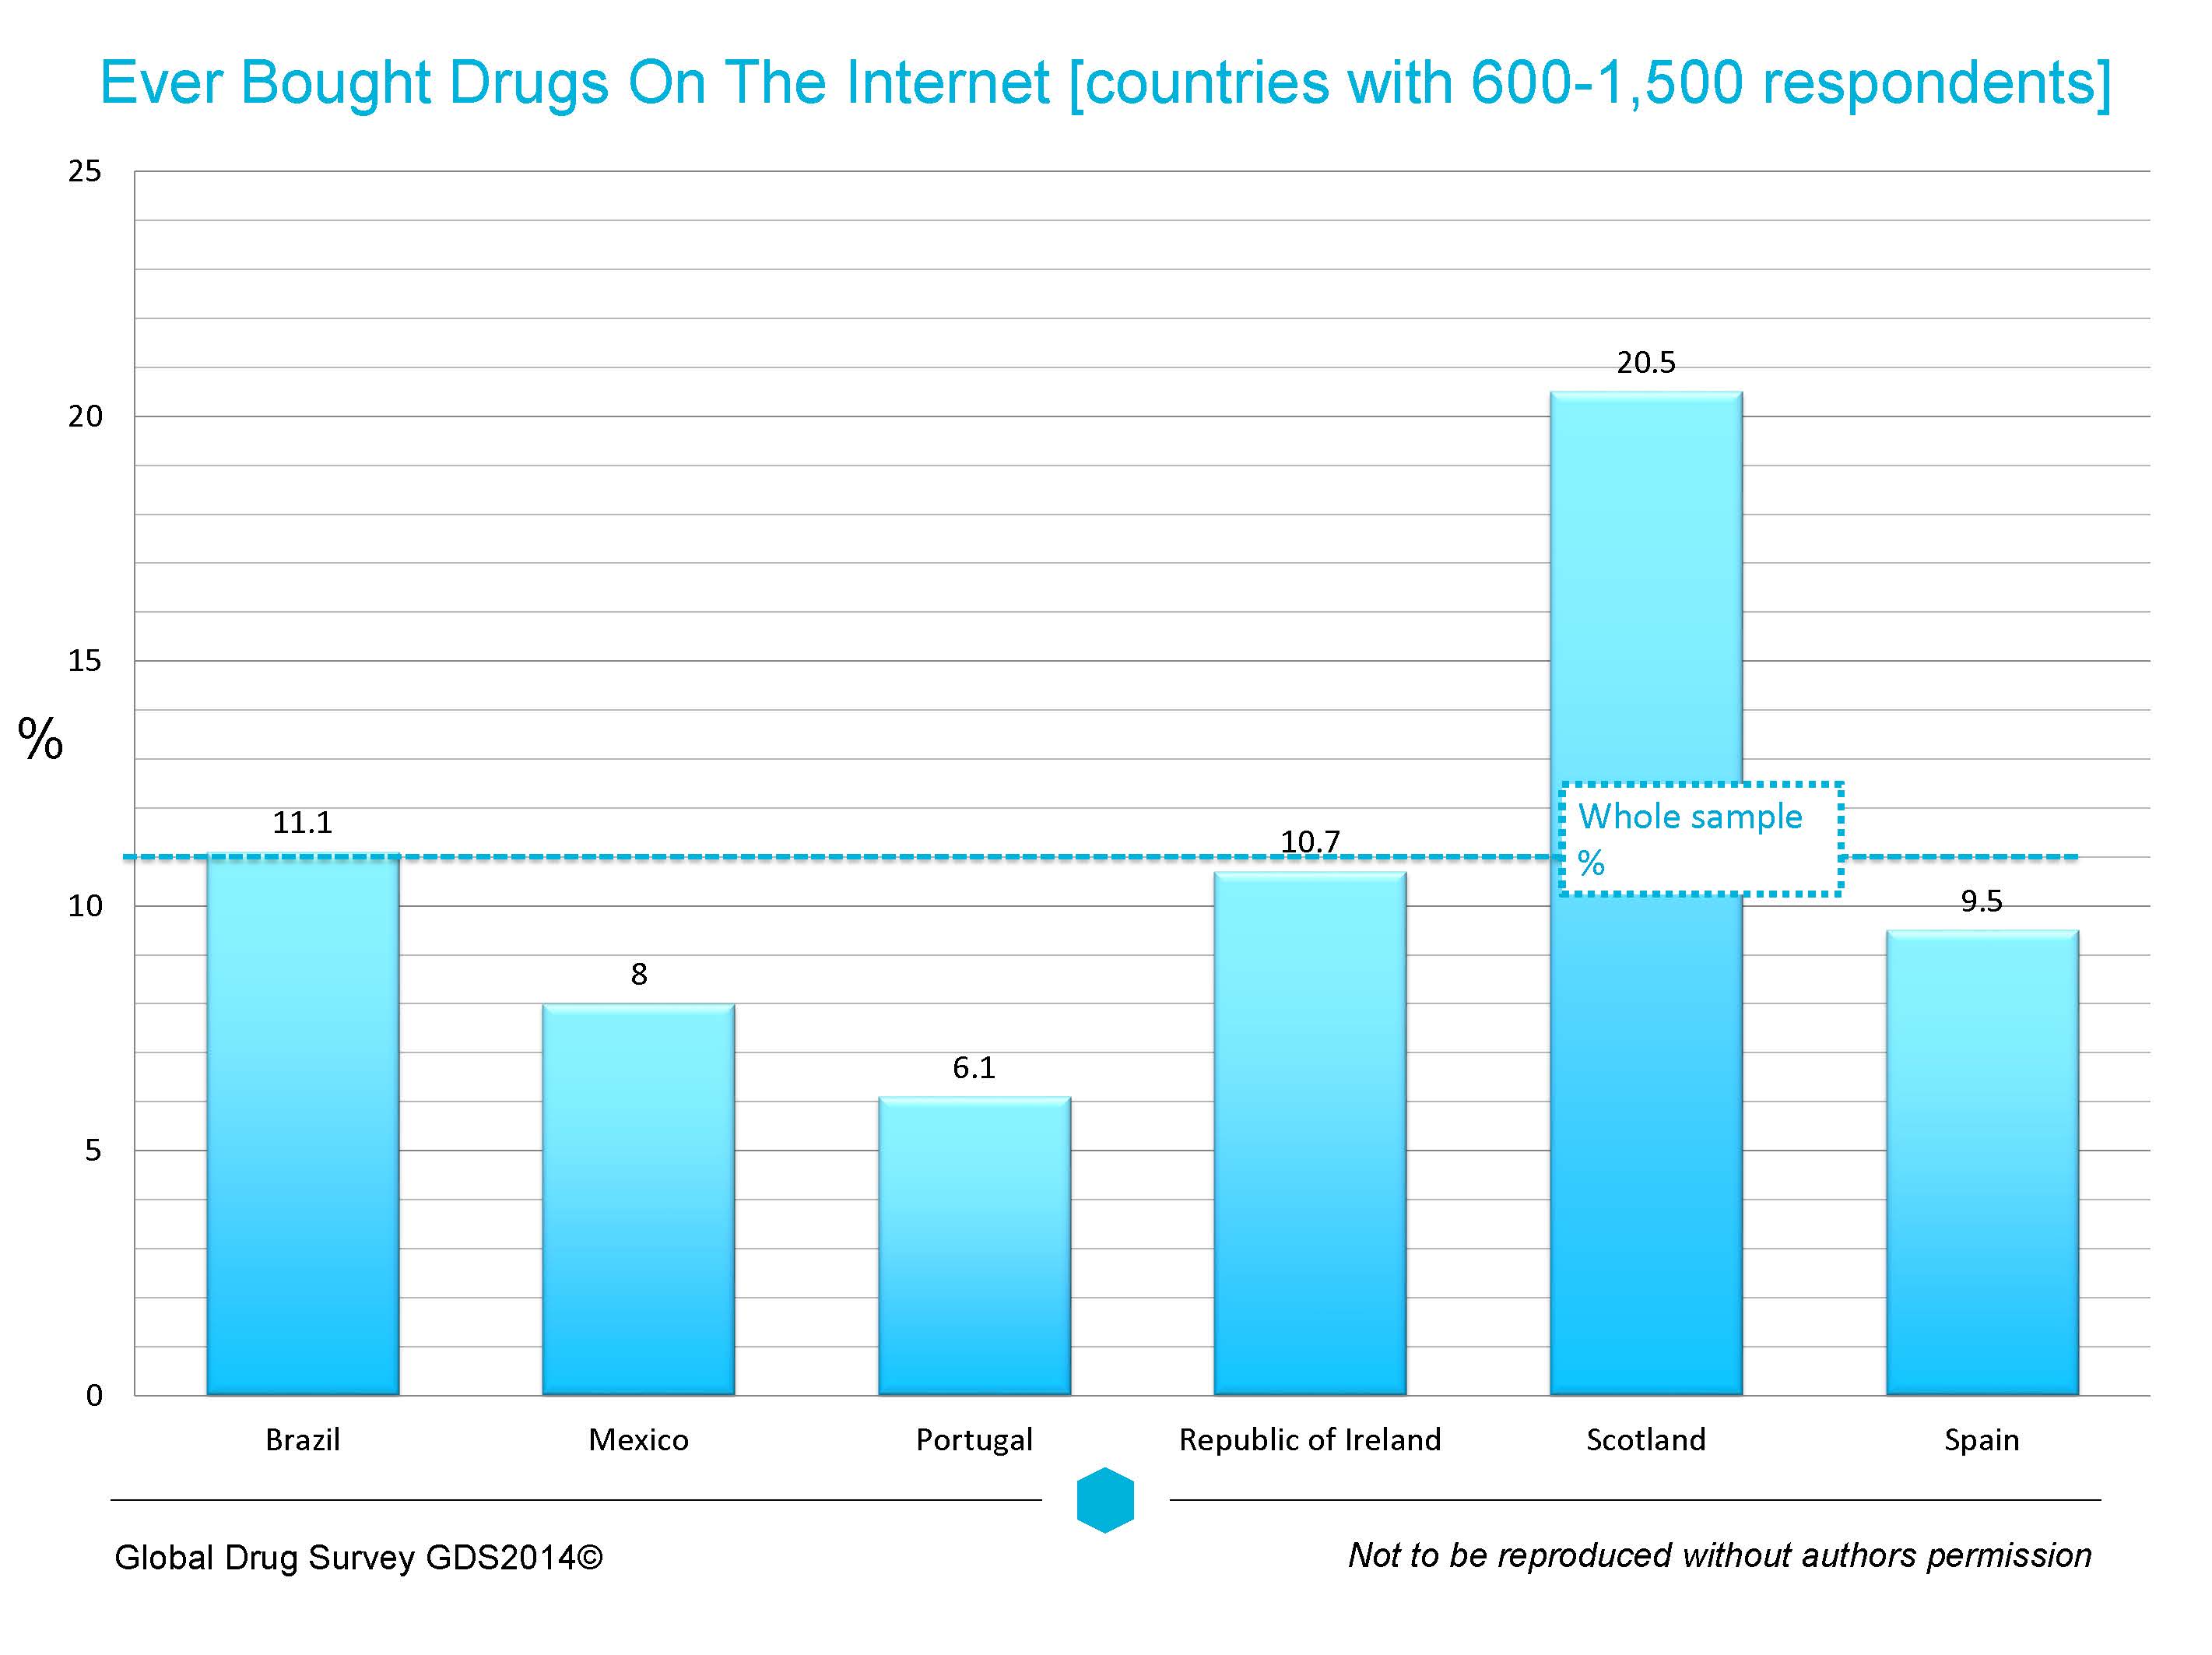 Chart showing how many people bought drugs on the internet in countries with between 600 to 1,500 respondents